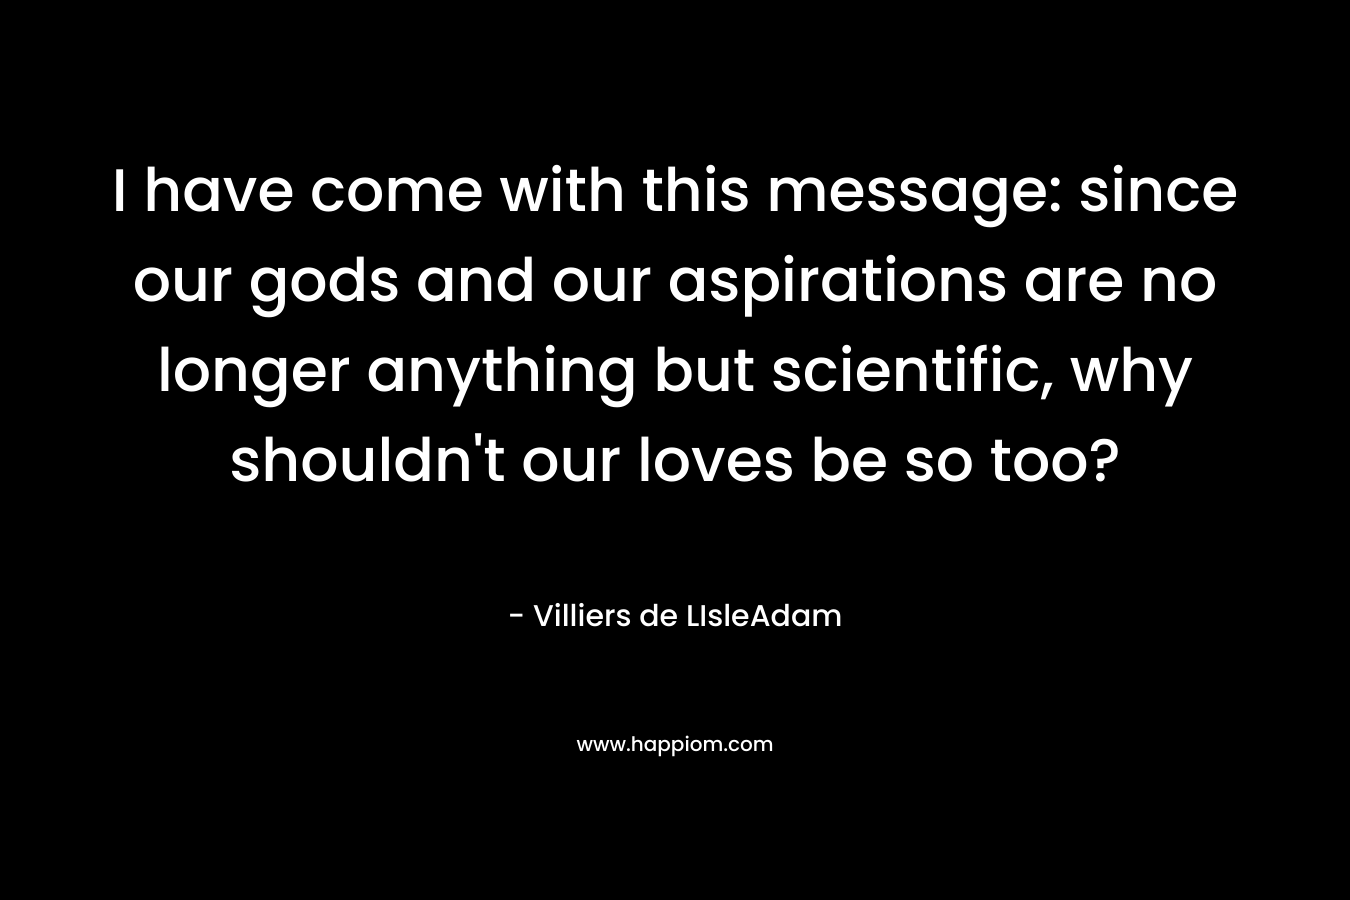 I have come with this message: since our gods and our aspirations are no longer anything but scientific, why shouldn't our loves be so too?